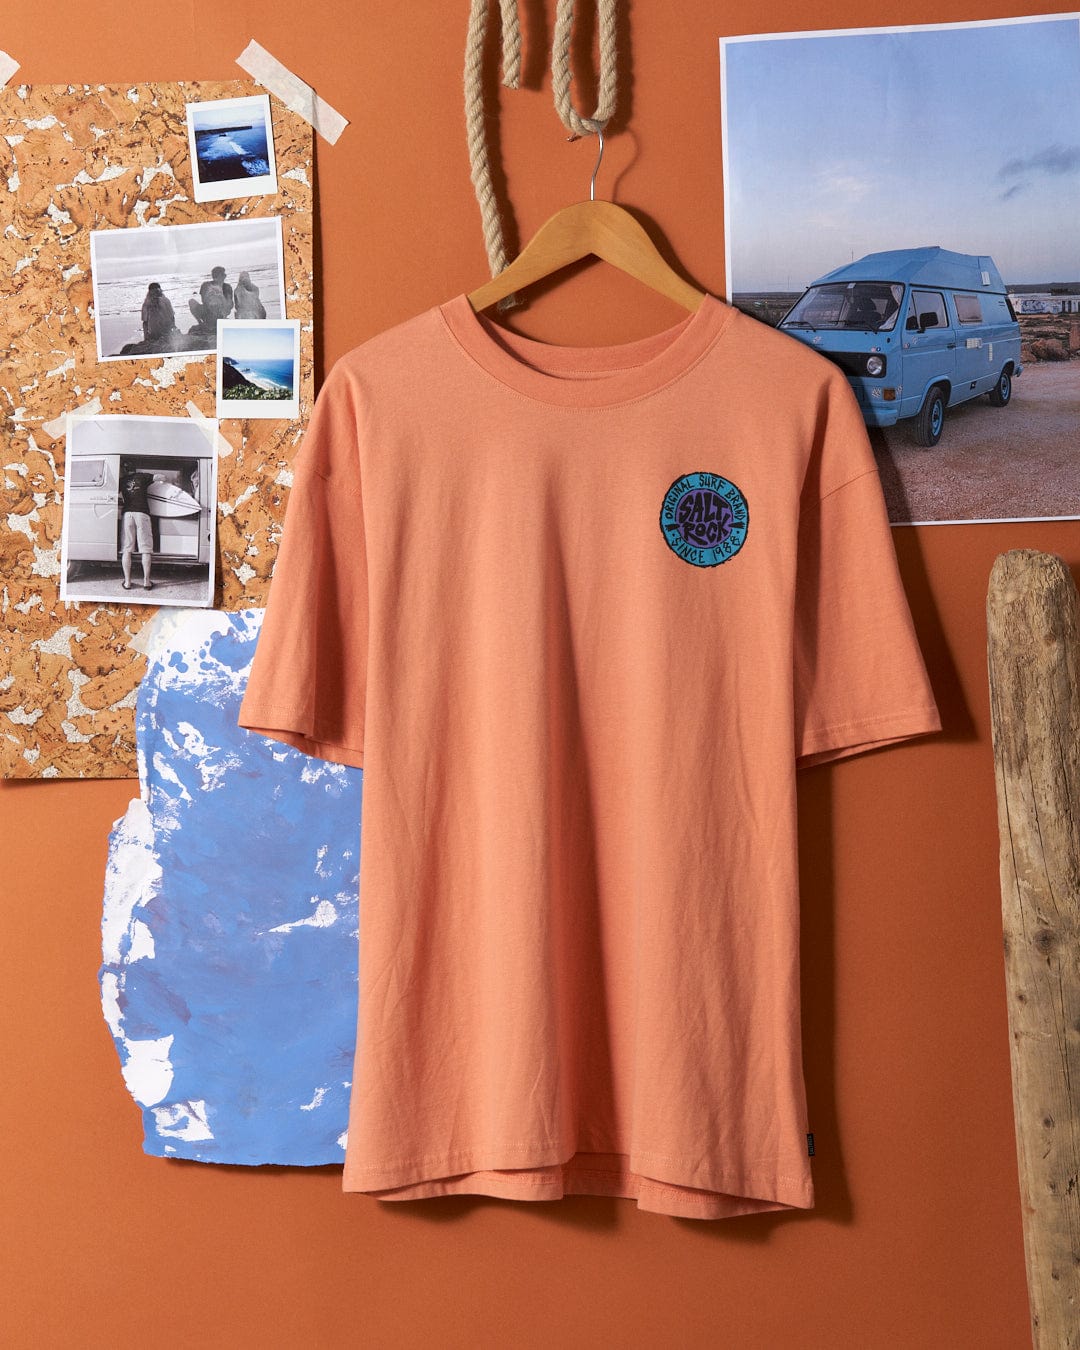 Peach SR Originals oversized t-shirt with a retro surf graphic Saltrock logo on the chest, displayed on a wall beside a corkboard with photos and a blue-painted piece of wood.